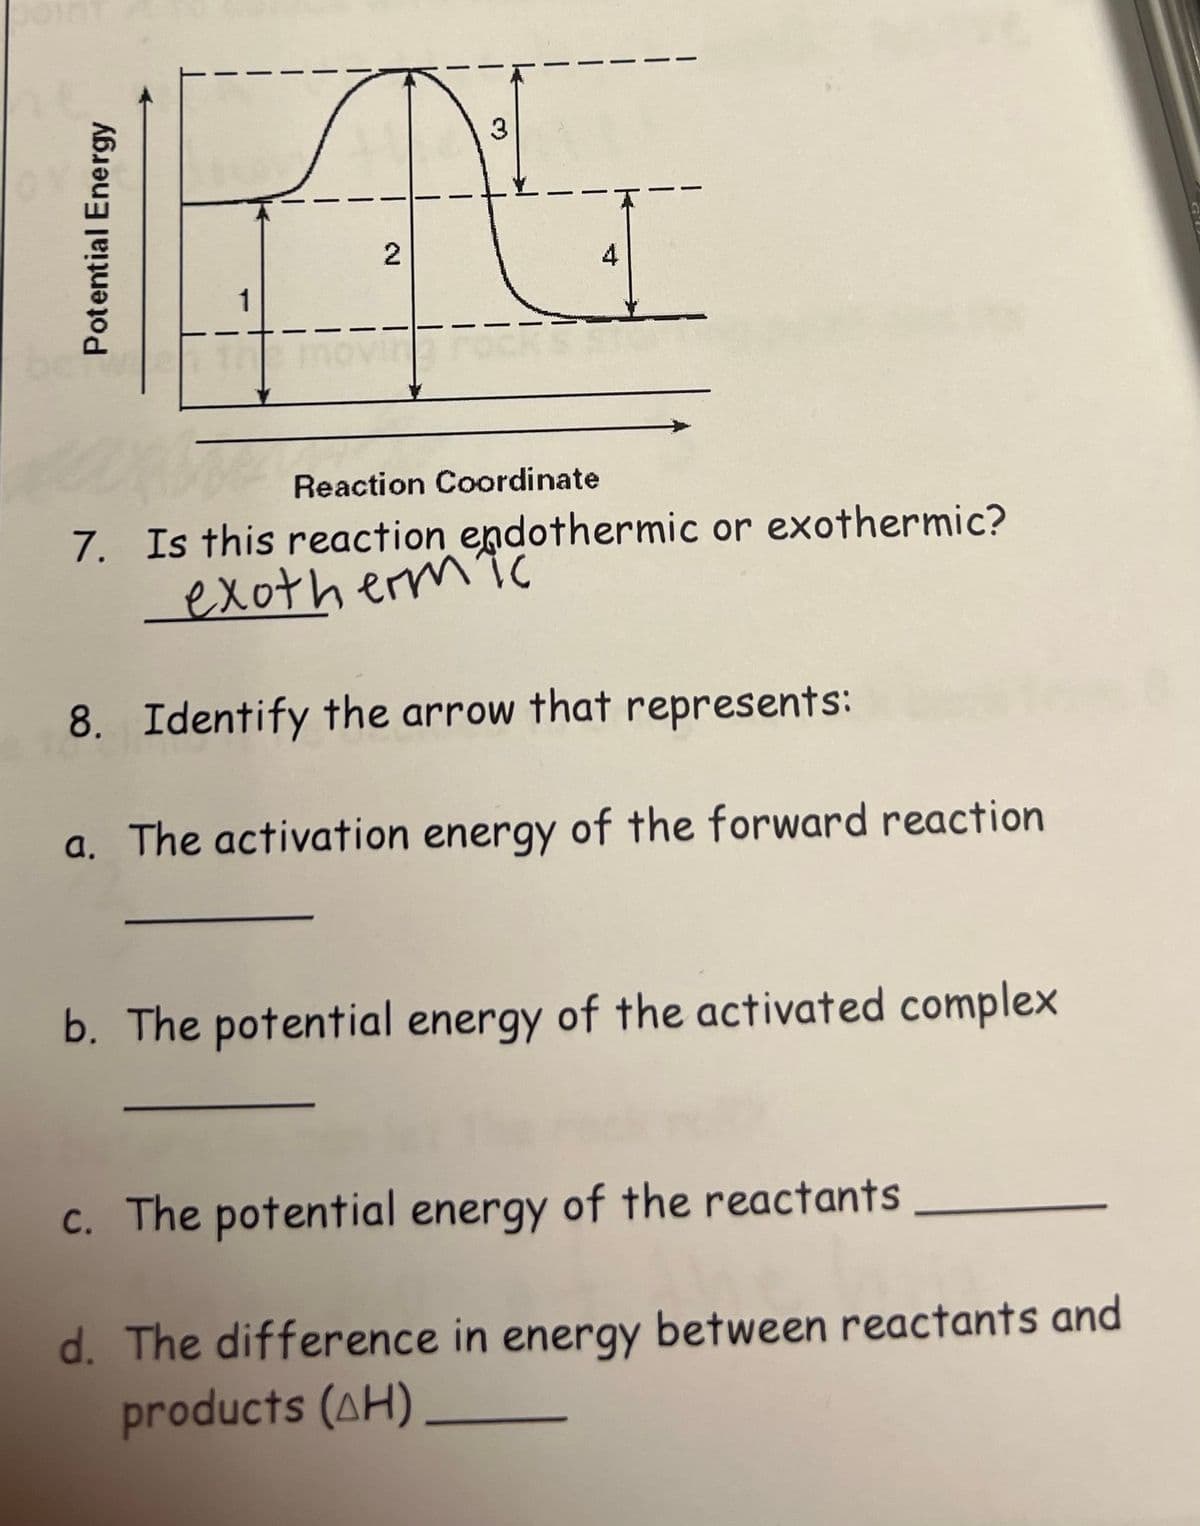 3
4
1
Reaction Coordinate
7. Is this reaction endothermic or exothermic?
exotherm
8. Identify the arrow that represents:
a. The activation energy of the forward reaction
b. The potential energy of the activated complex
c. The potential energy of the reactants
d. The difference in energy between reactants and
products (AH)
GU
2.
Potential Energy
